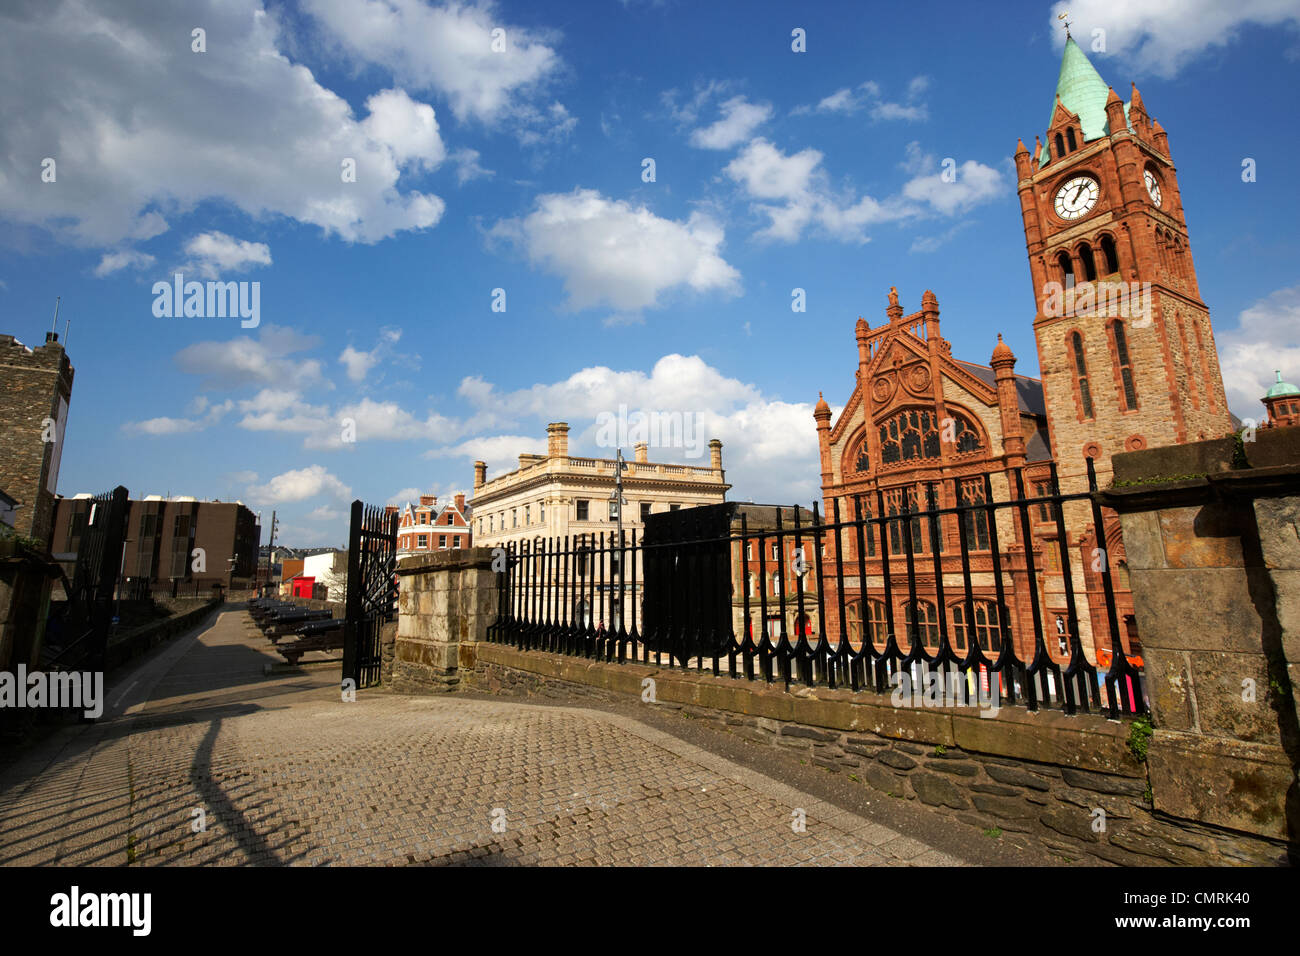 Shipquay gate in Derrys walls and the Guildhall Derry city county londonderry northern ireland uk. Stock Photo